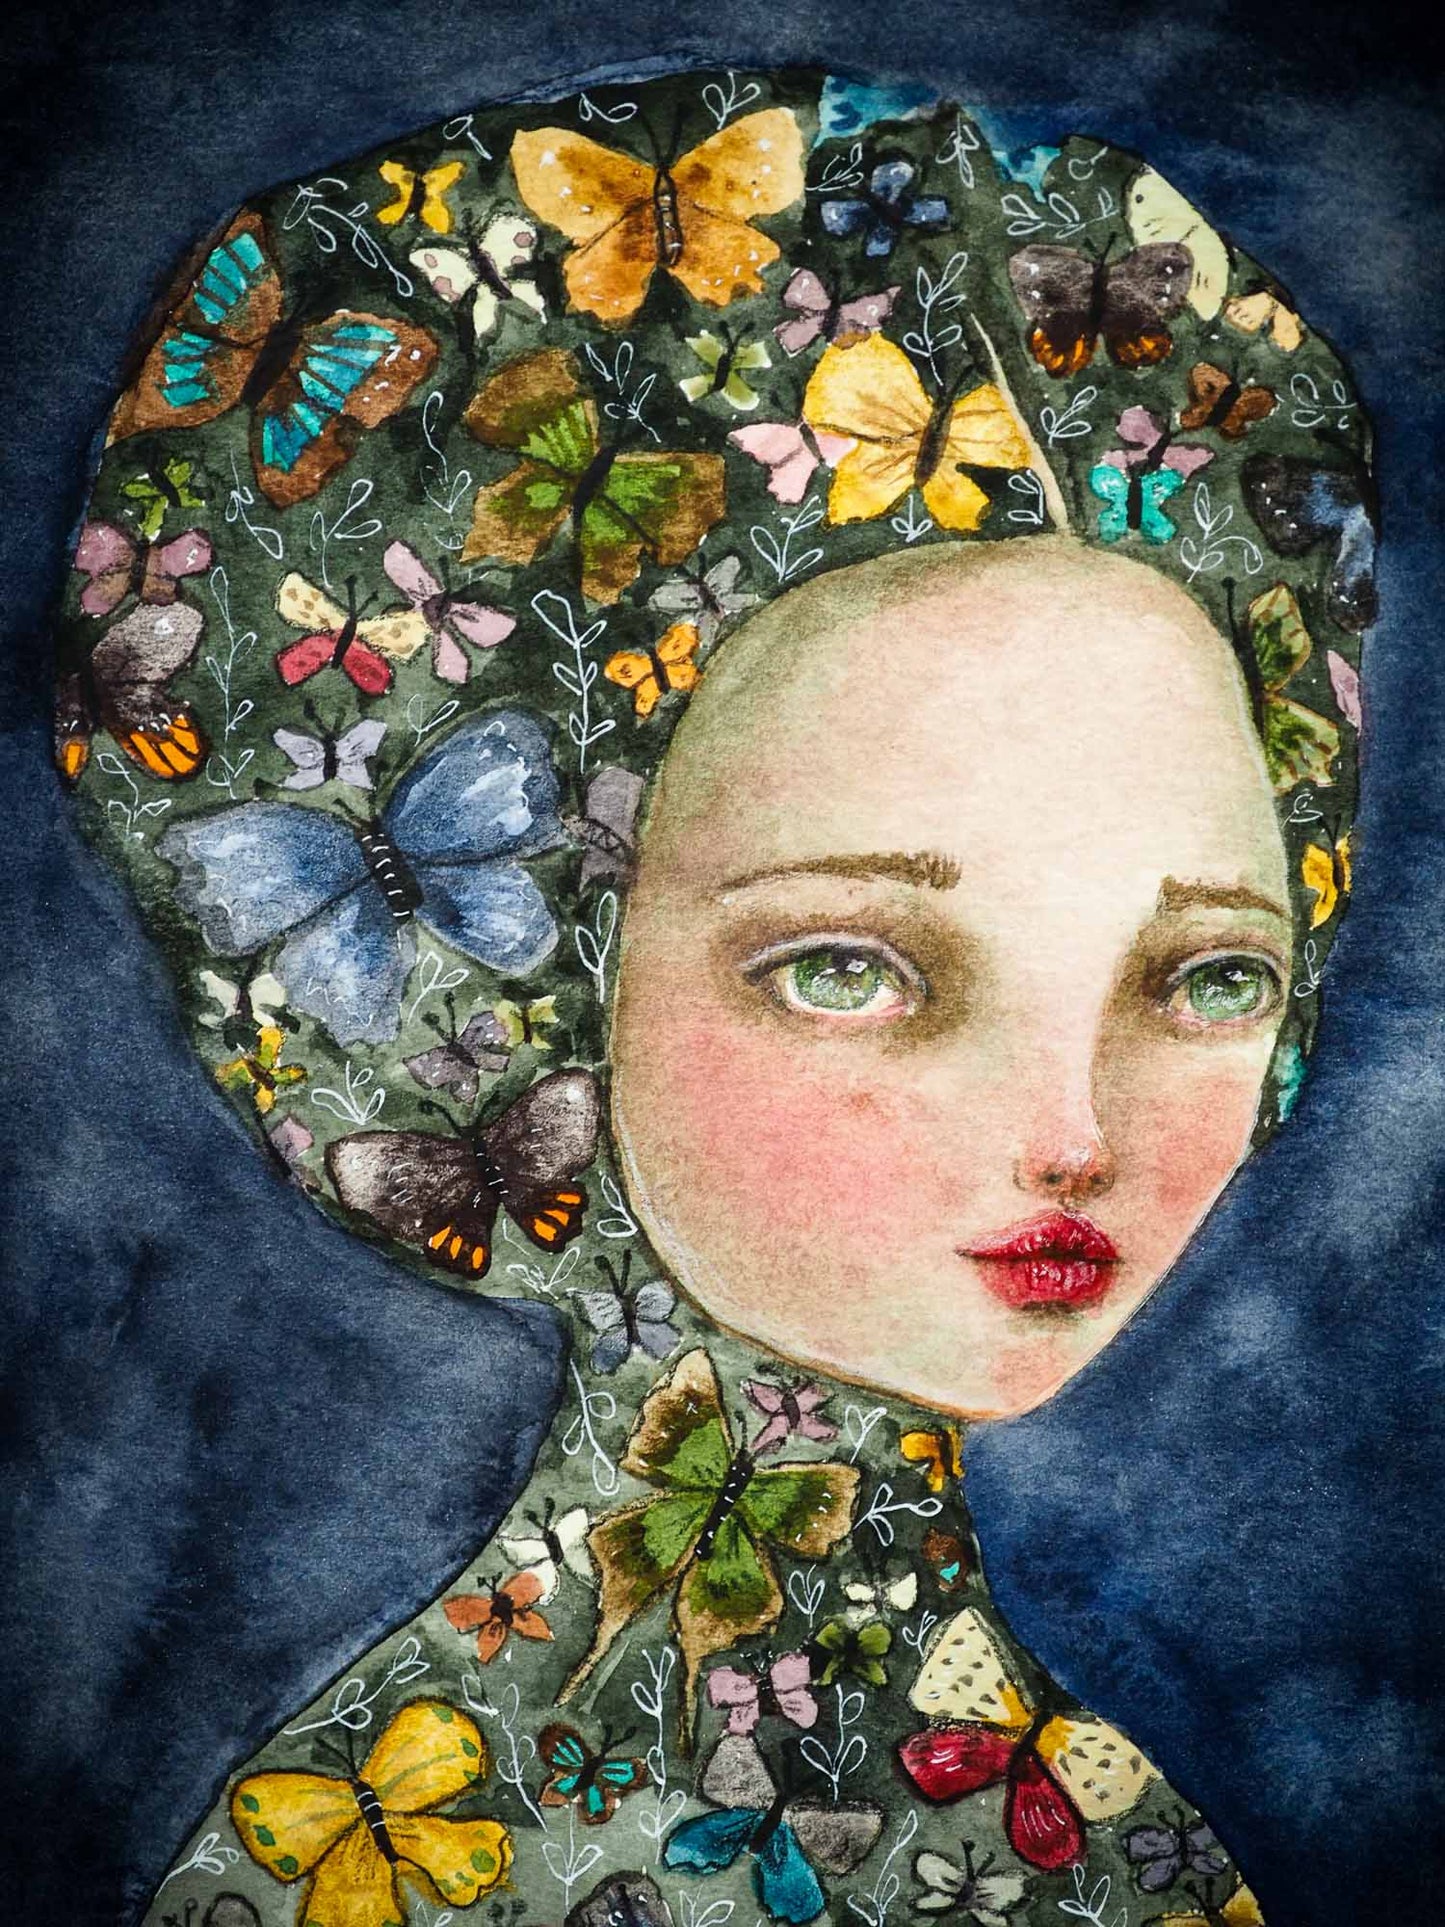 original watercolor covered woman illustration by Danita Art. Made on sturdy professional watercolor paper, it's a surreal image that will be the highlight of your Danita fine art collection.